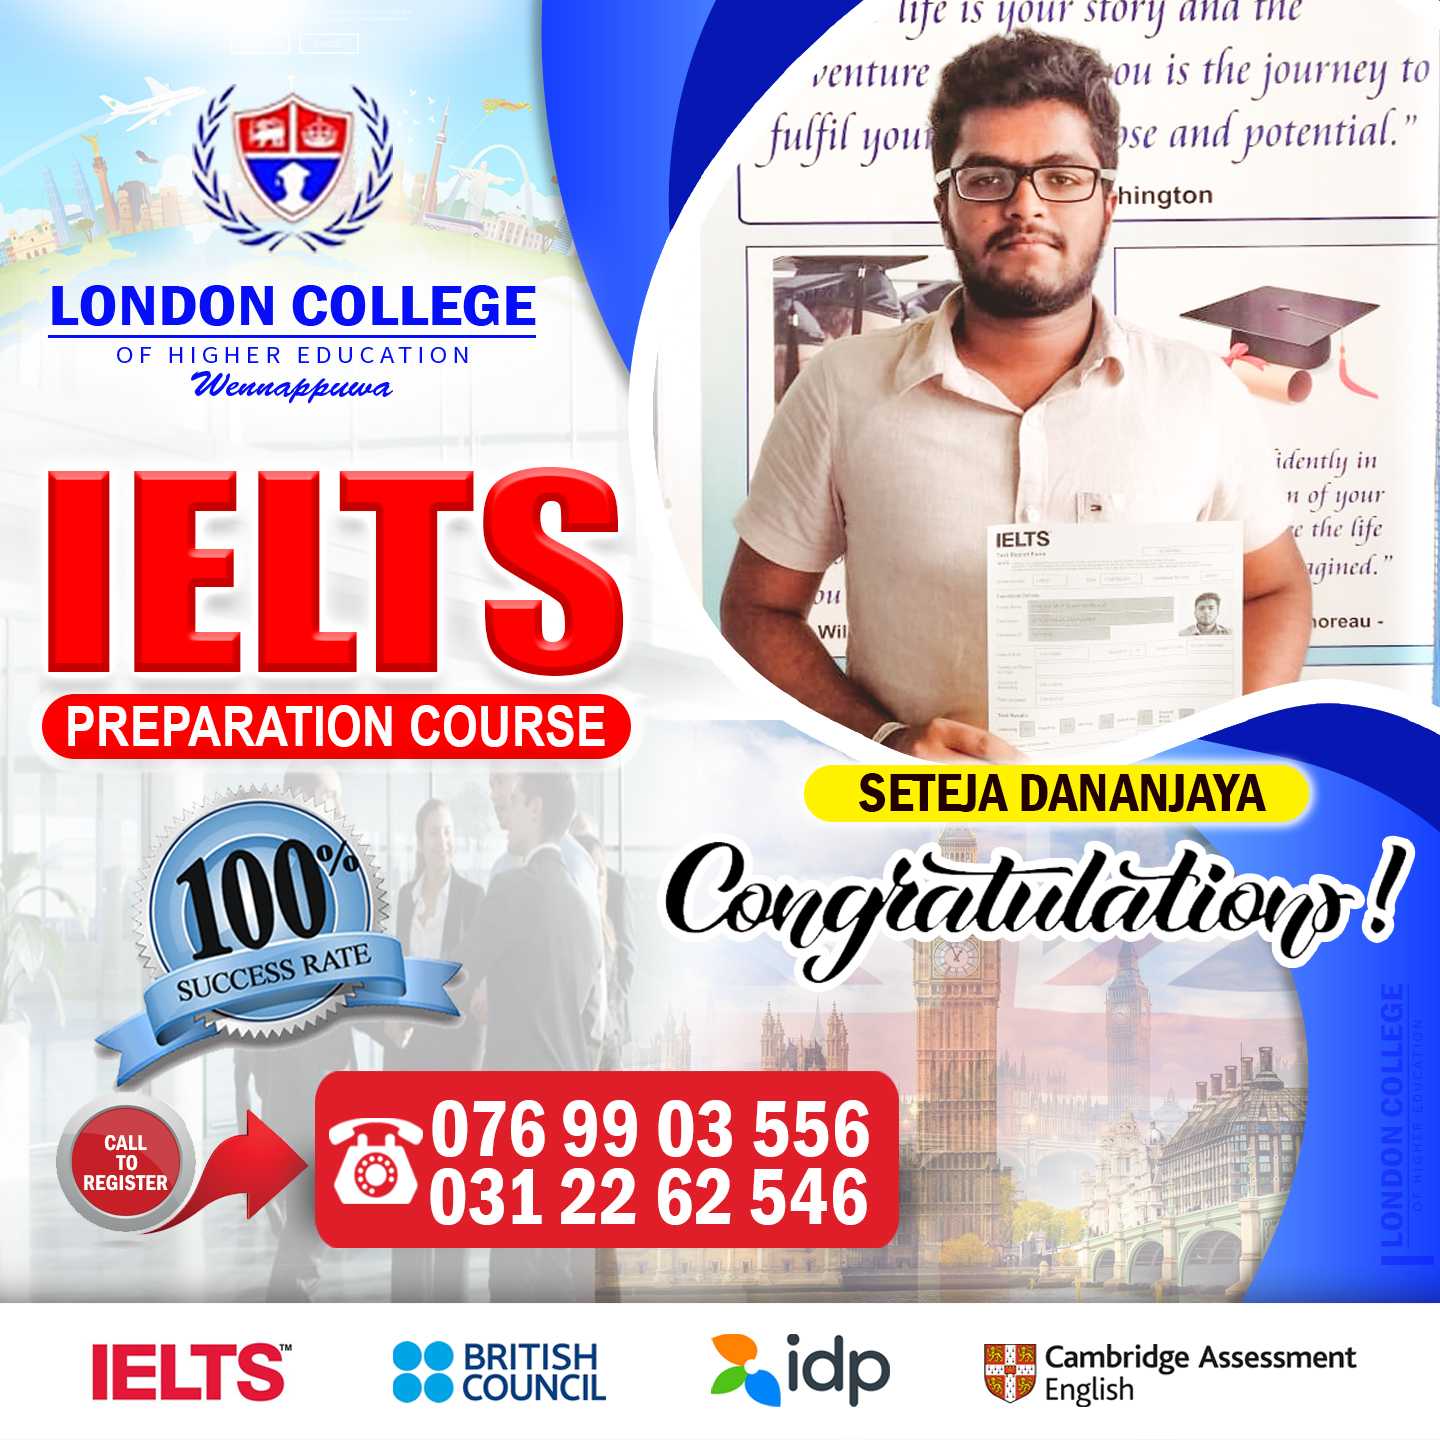 London College Of Higher Education,gallery,ielts